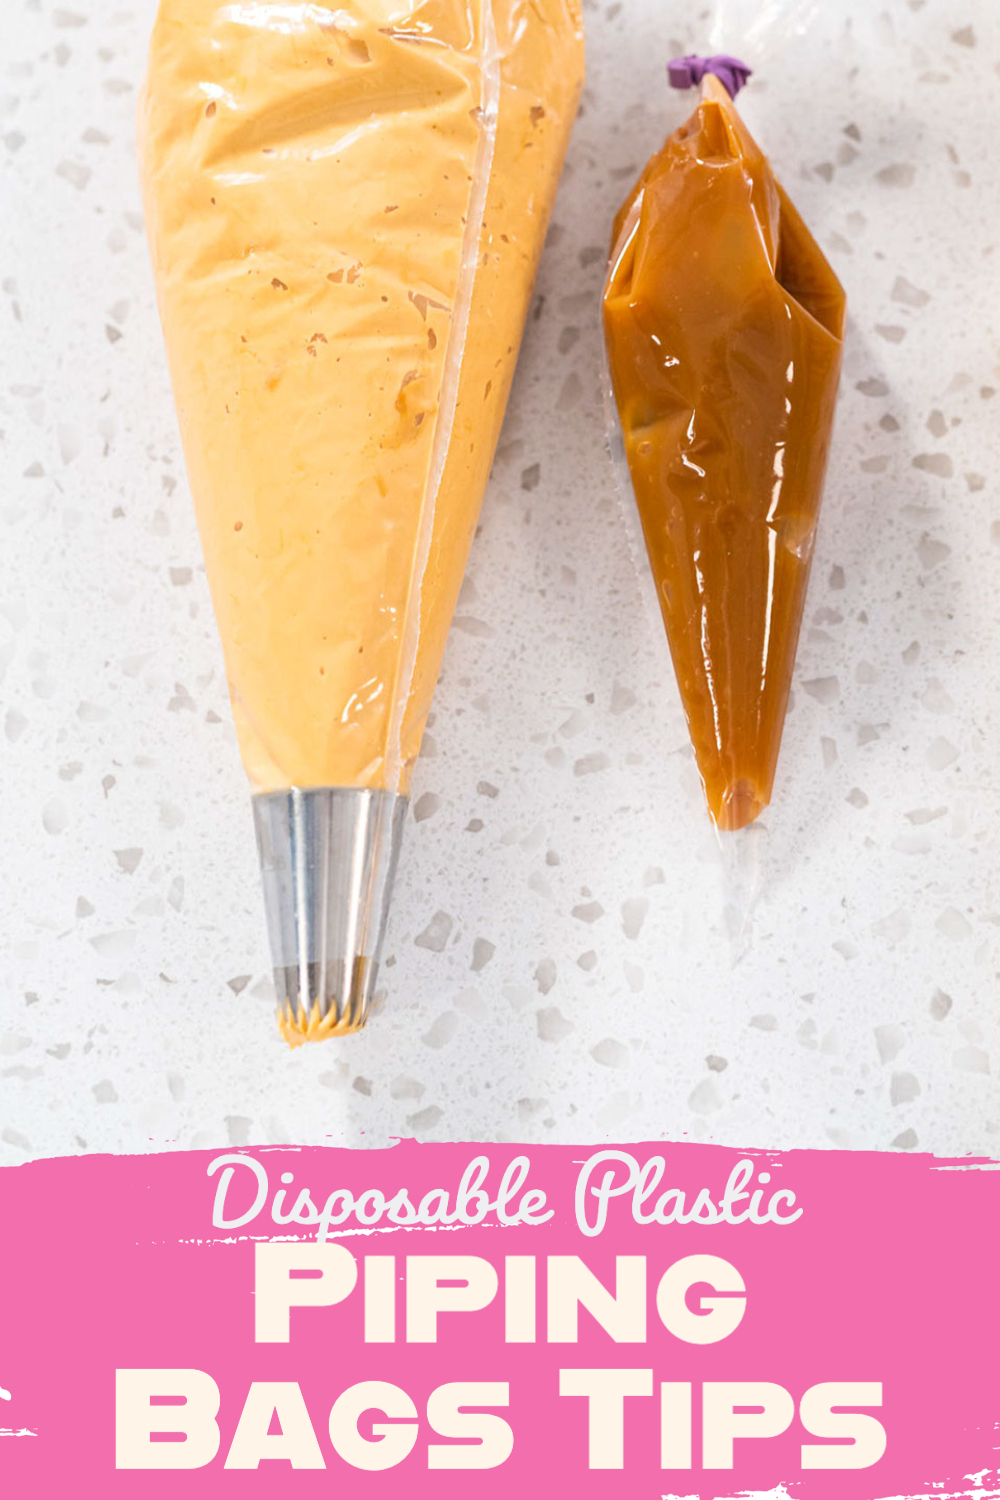 Disposable Plastic Piping Bags Tips